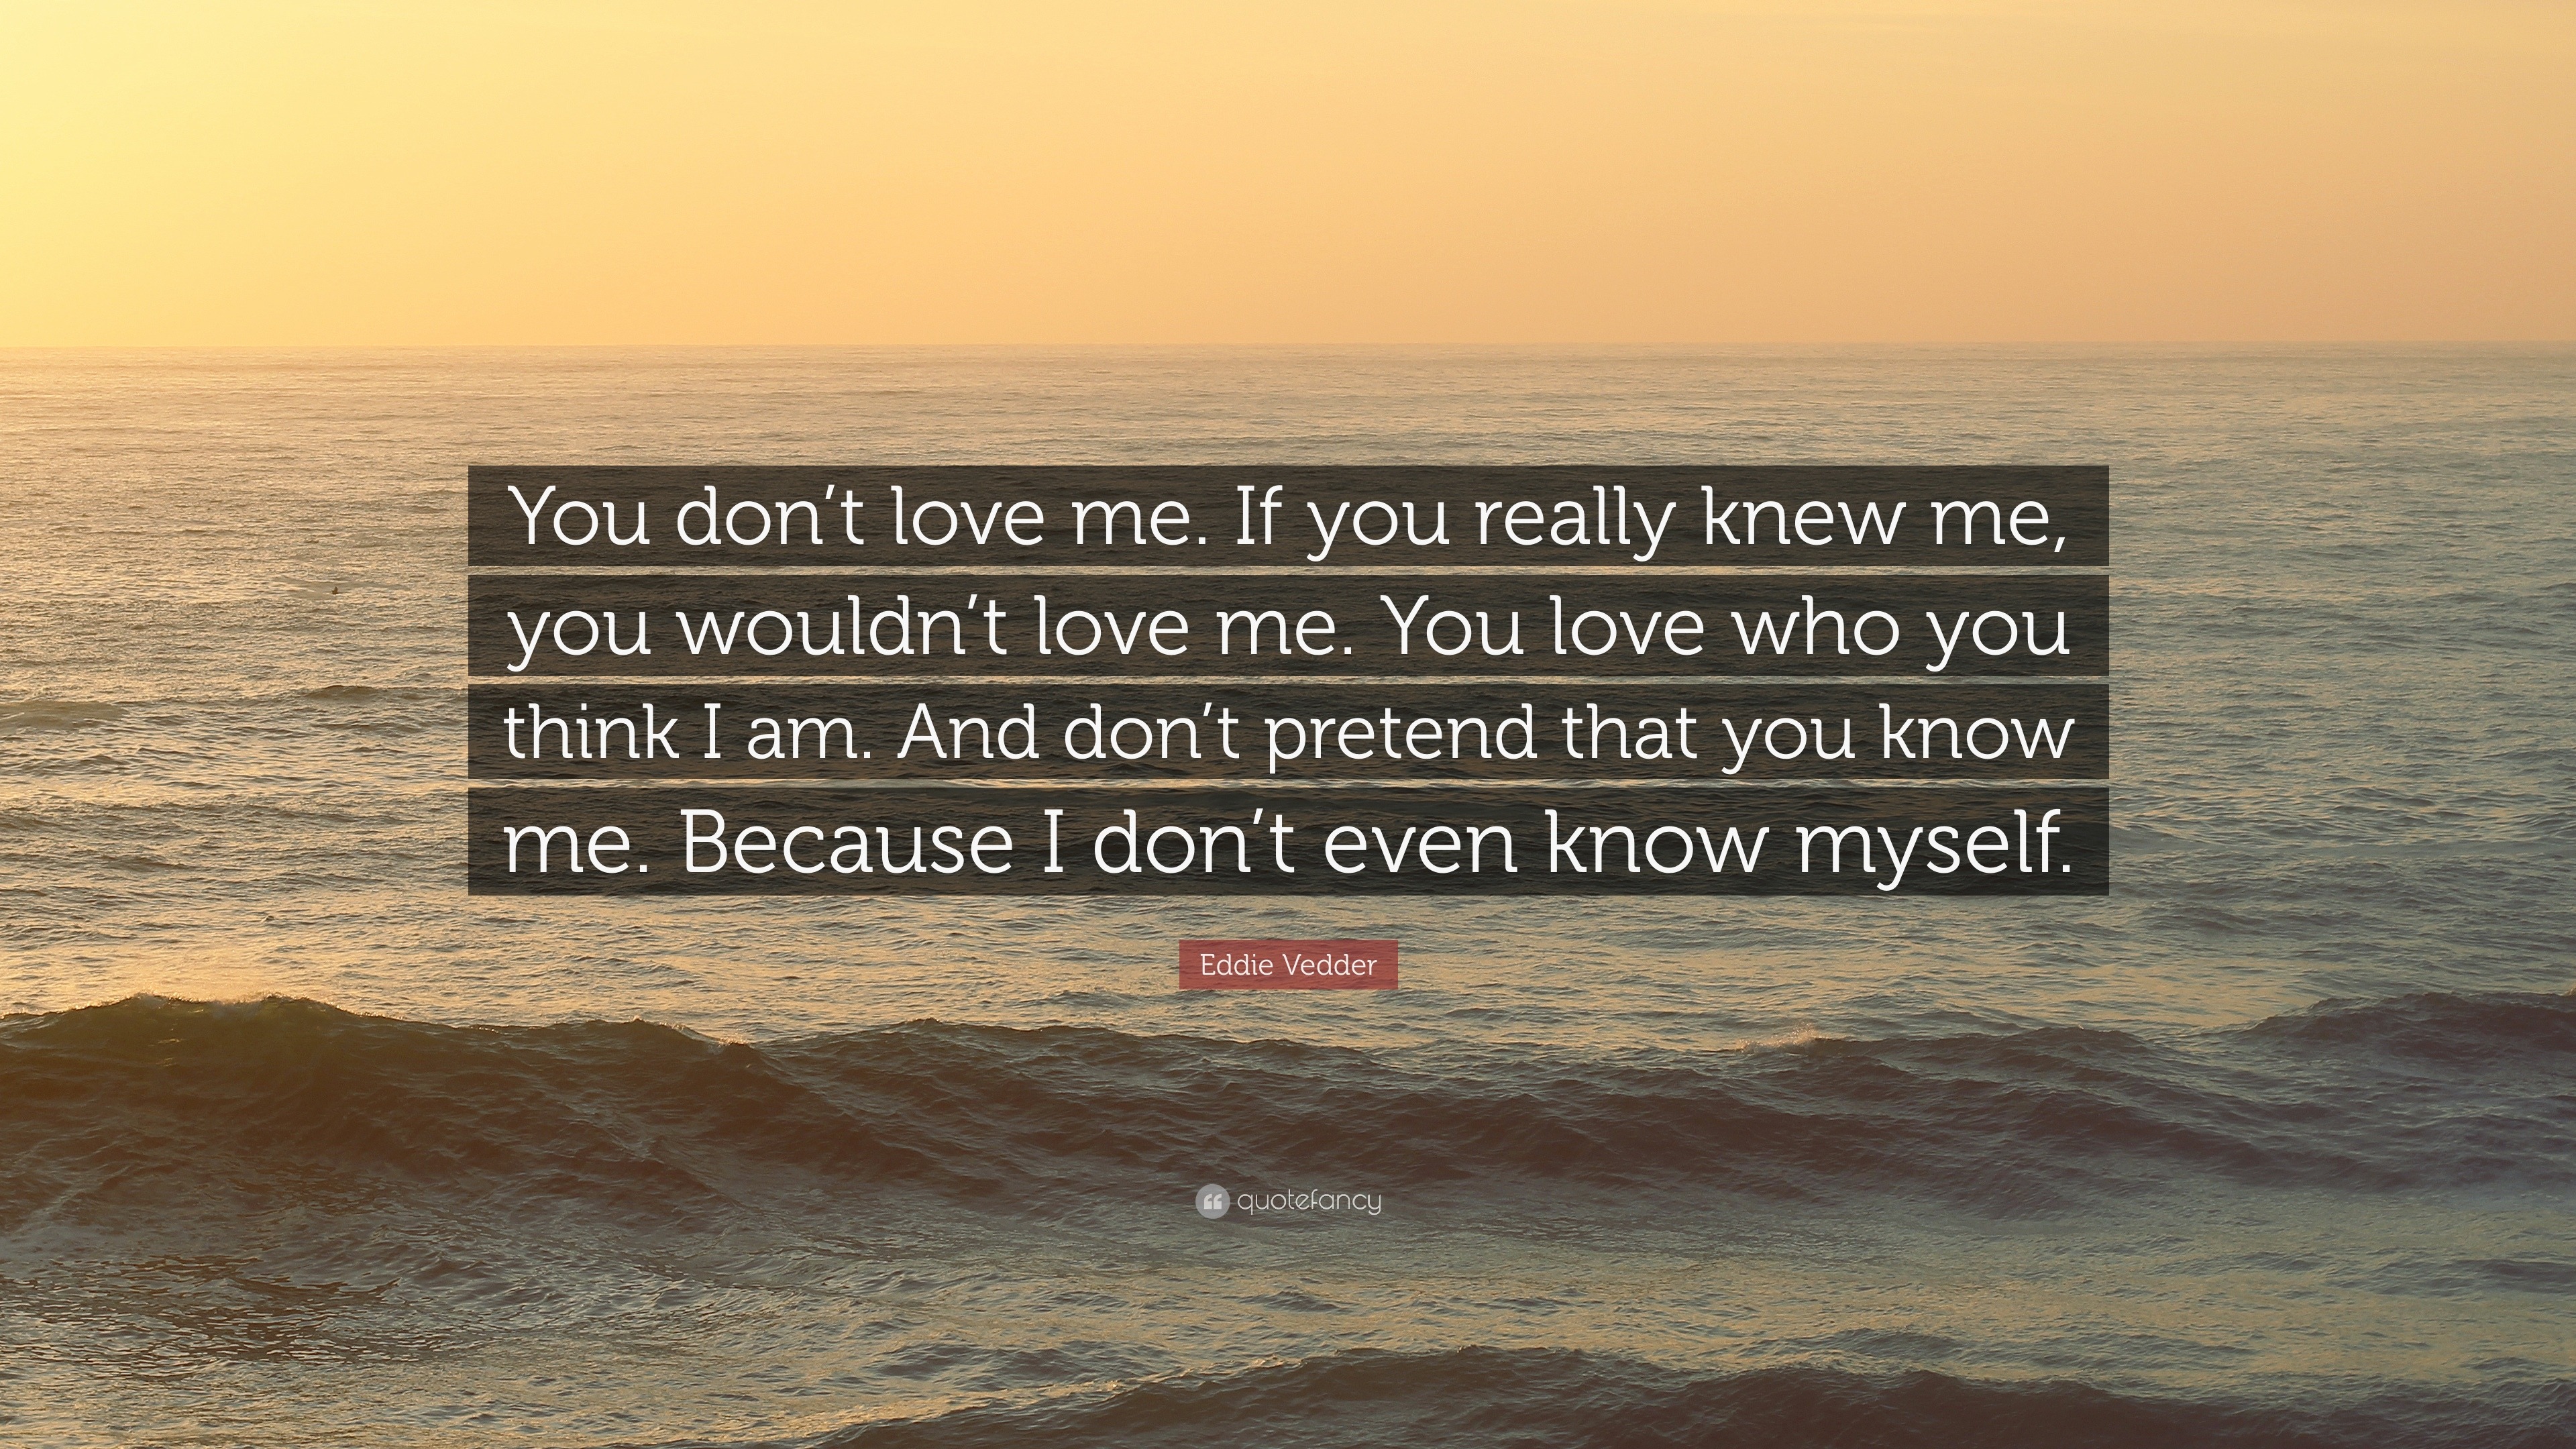 Ed Vedder Quote “You don t love me If you really knew